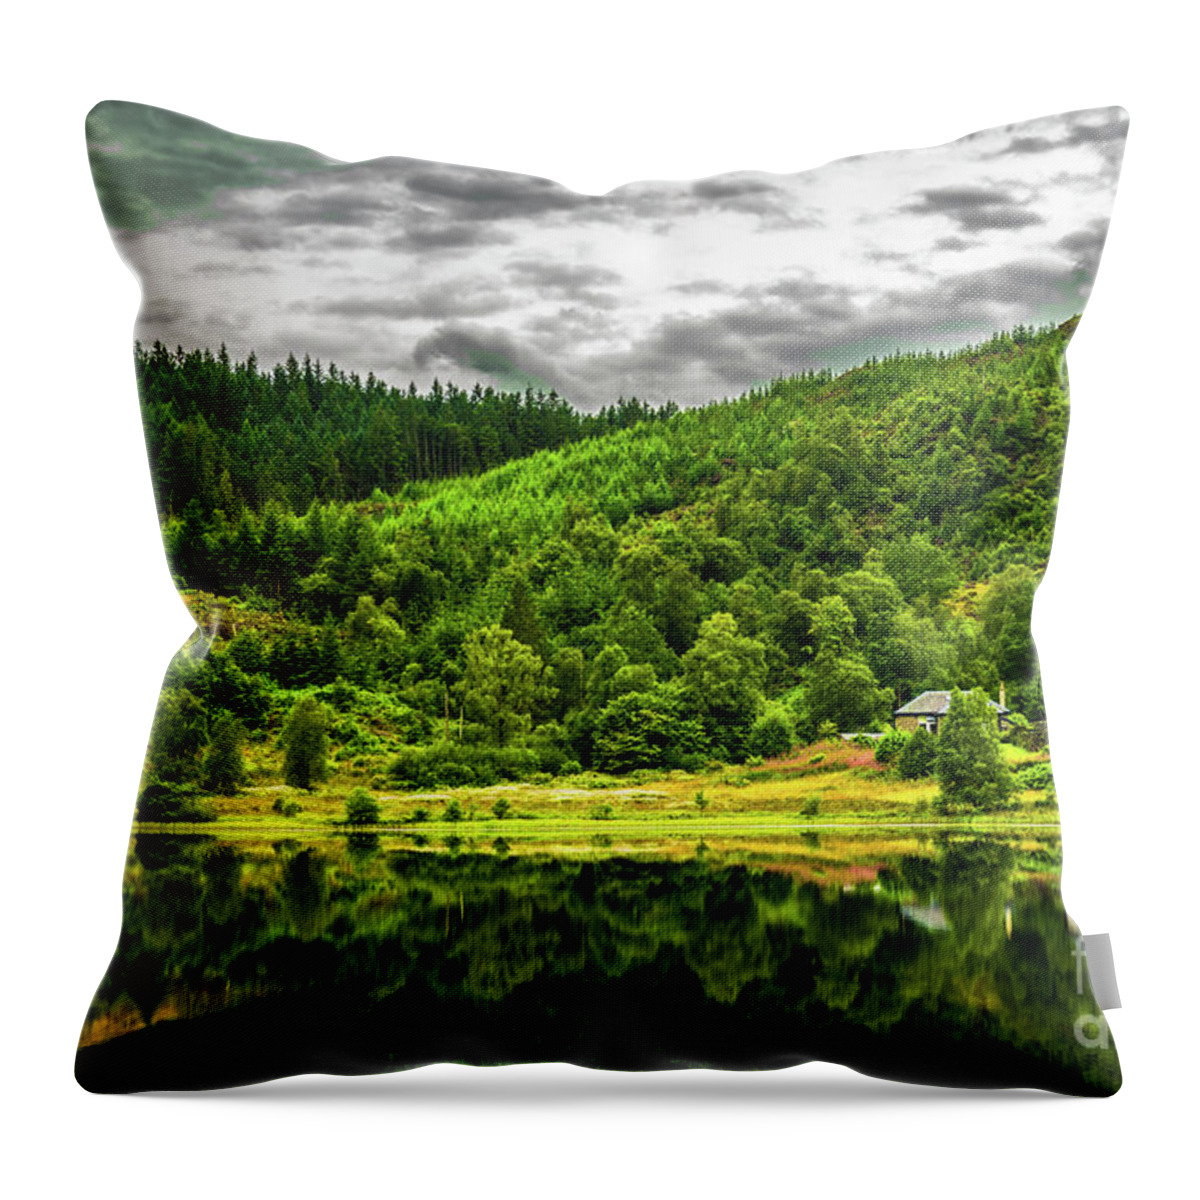 Abandoned Throw Pillow featuring the photograph Lonesome House At Calm And Smooth Lake In Scotland by Andreas Berthold